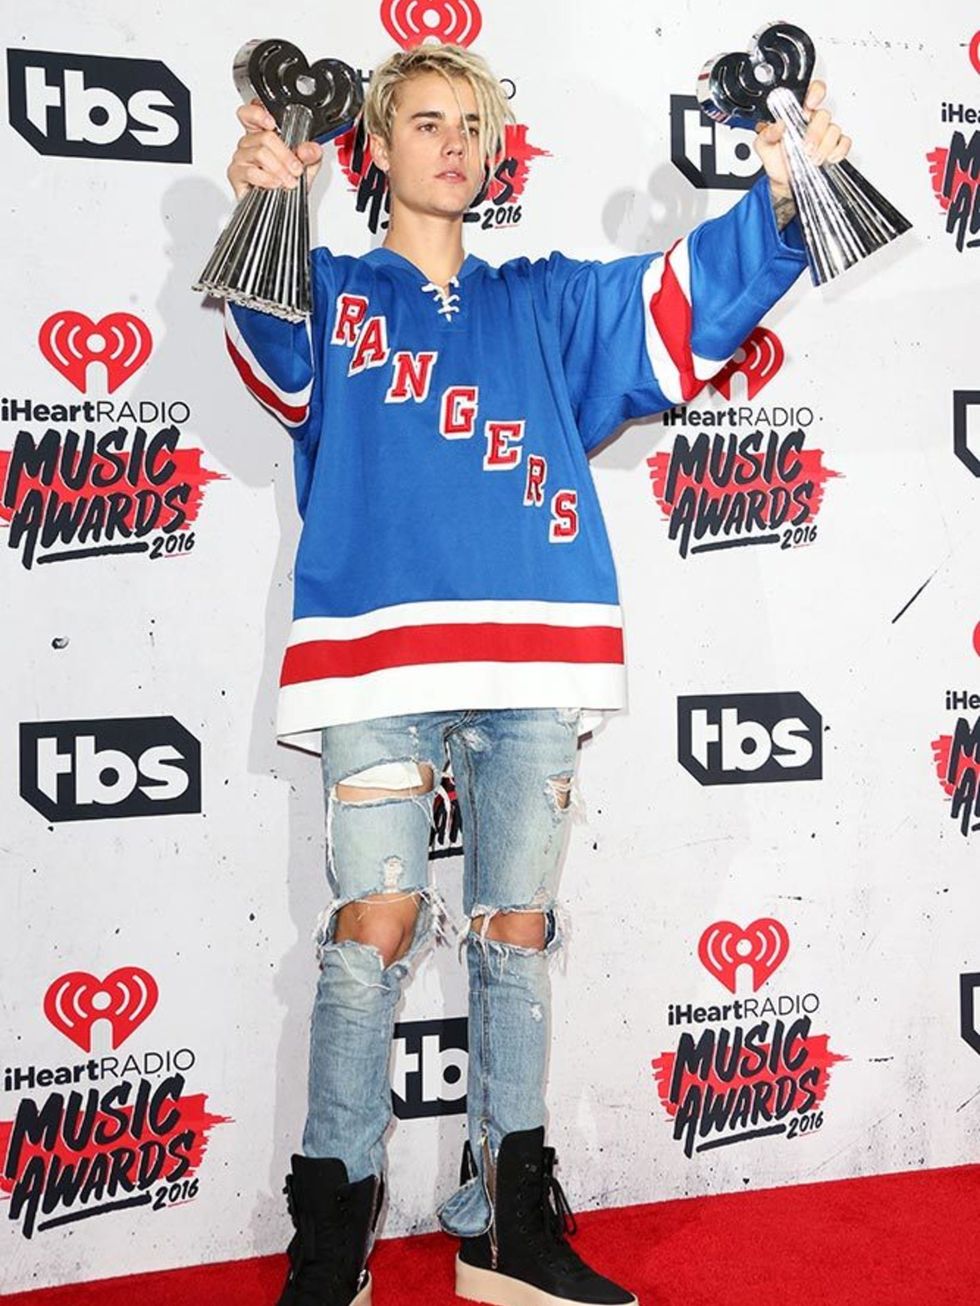 Justin Bieber attends the iHeart Radio Music awards in California, April 2016.